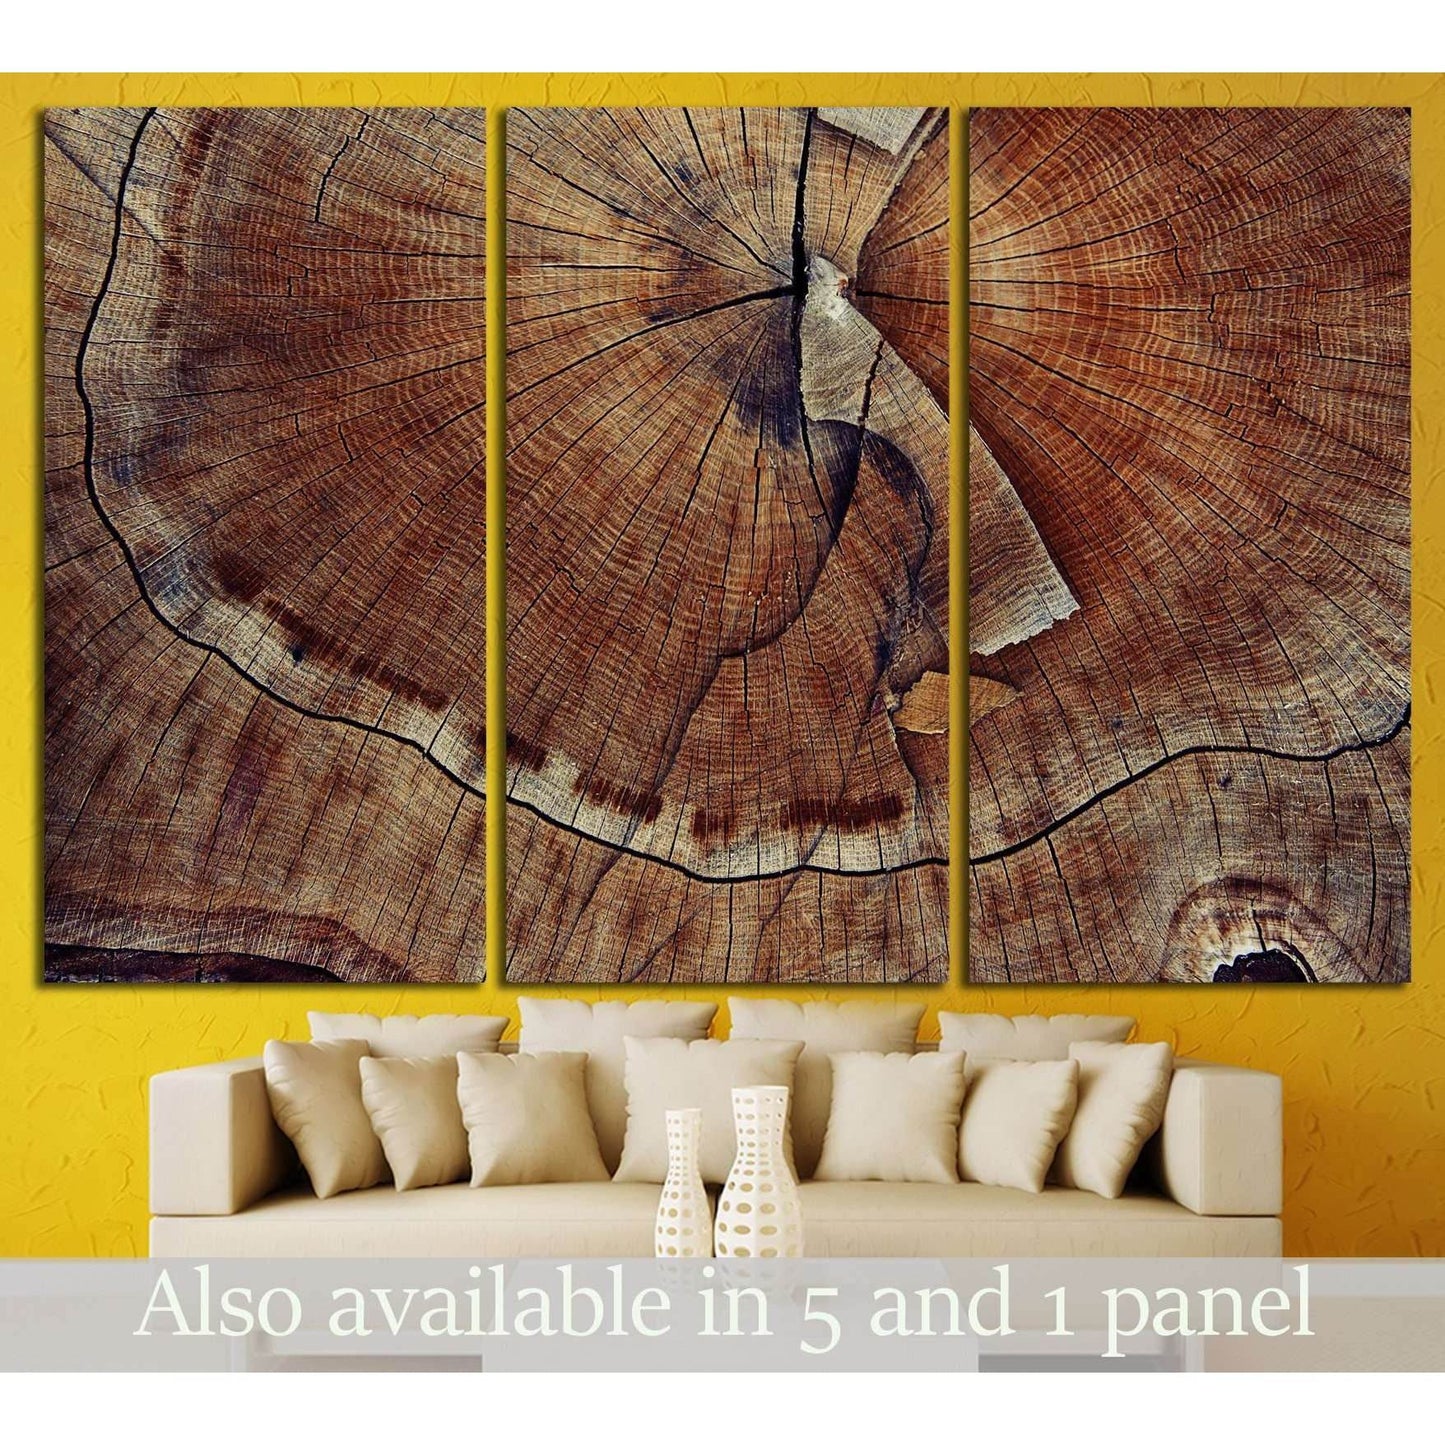 Tree Ring Detail Canvas Print for Rustic Home DecorThis canvas print features a close-up of a tree's annual rings, offering a detailed and natural texture that would add an earthy and organic element to spaces such as a study, library, or any area with a